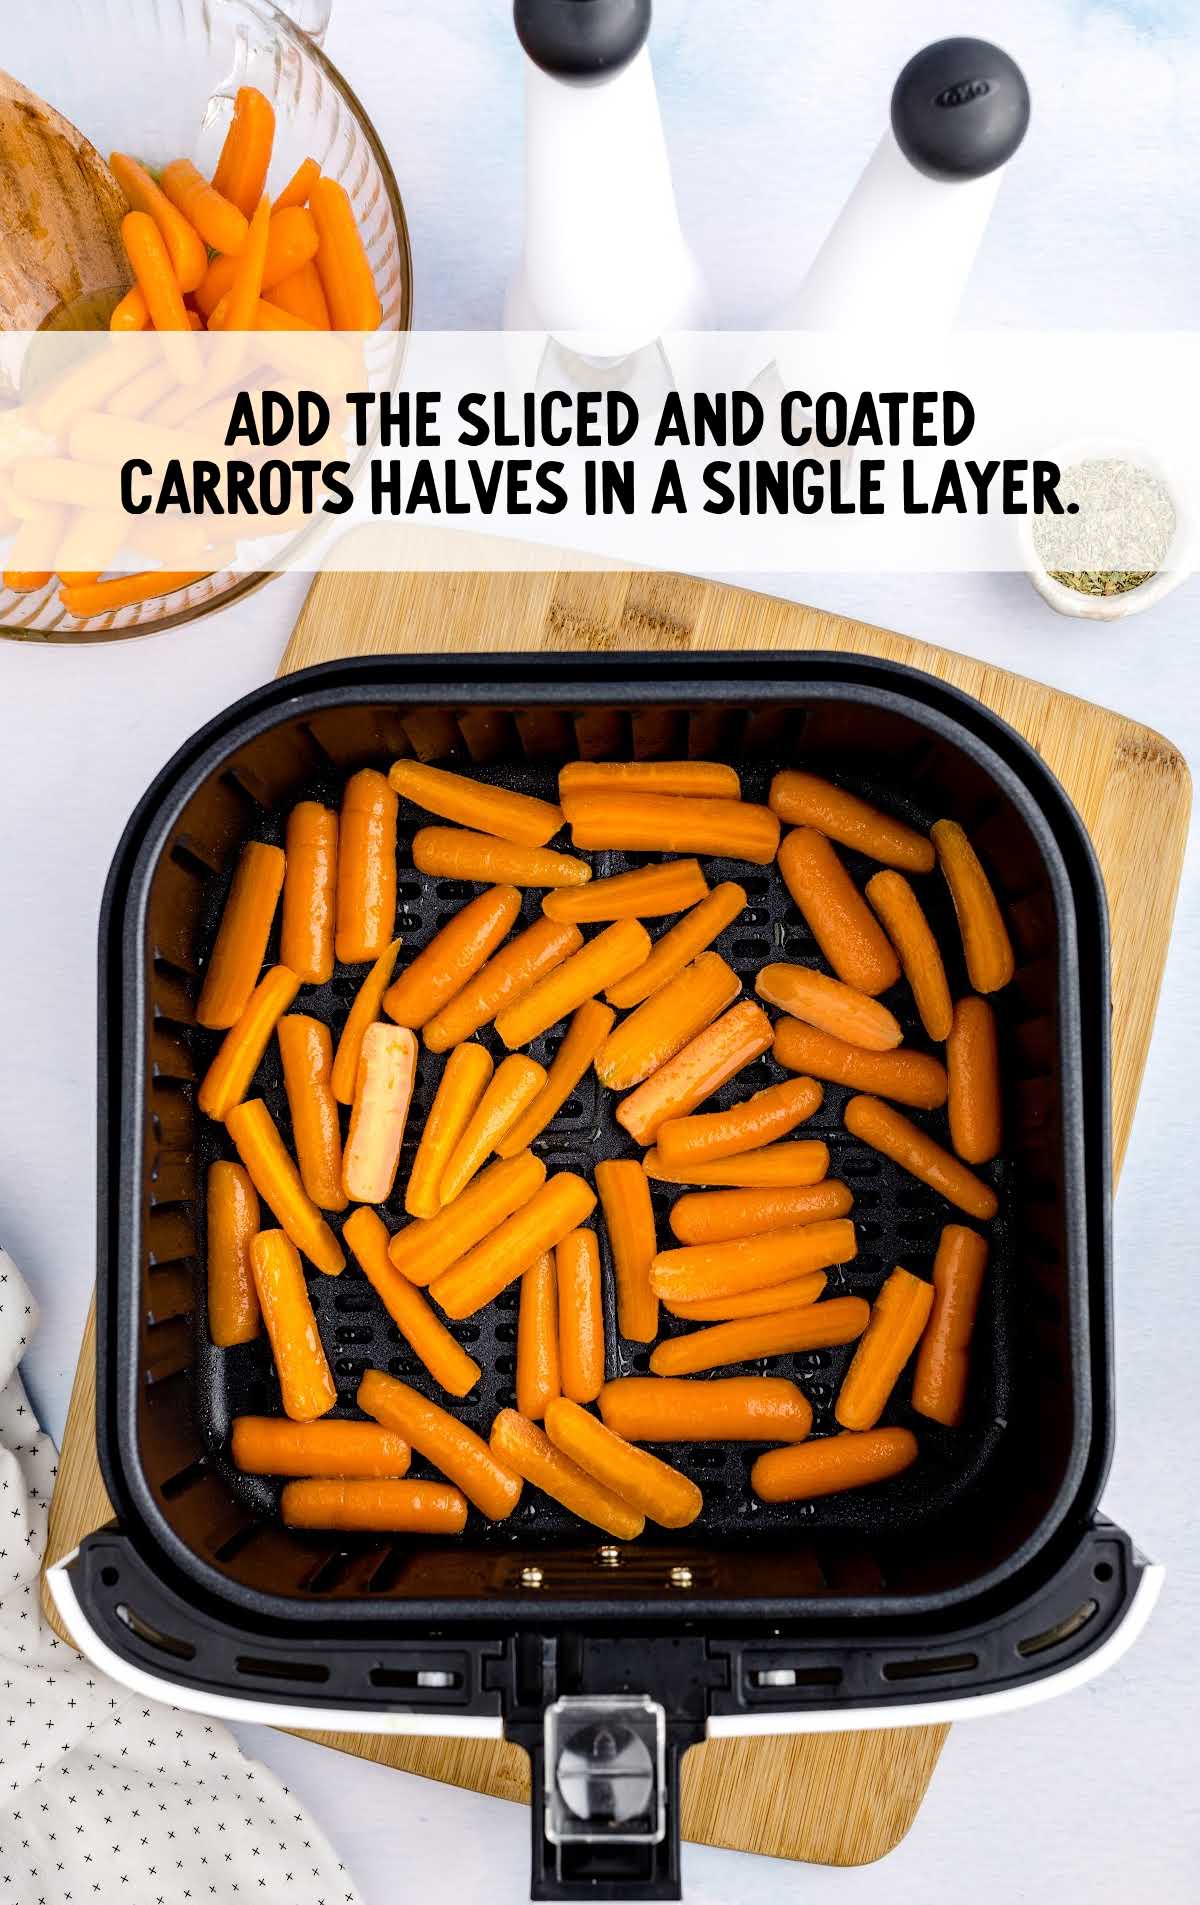 sliced and coated carrots halves added in a single layer